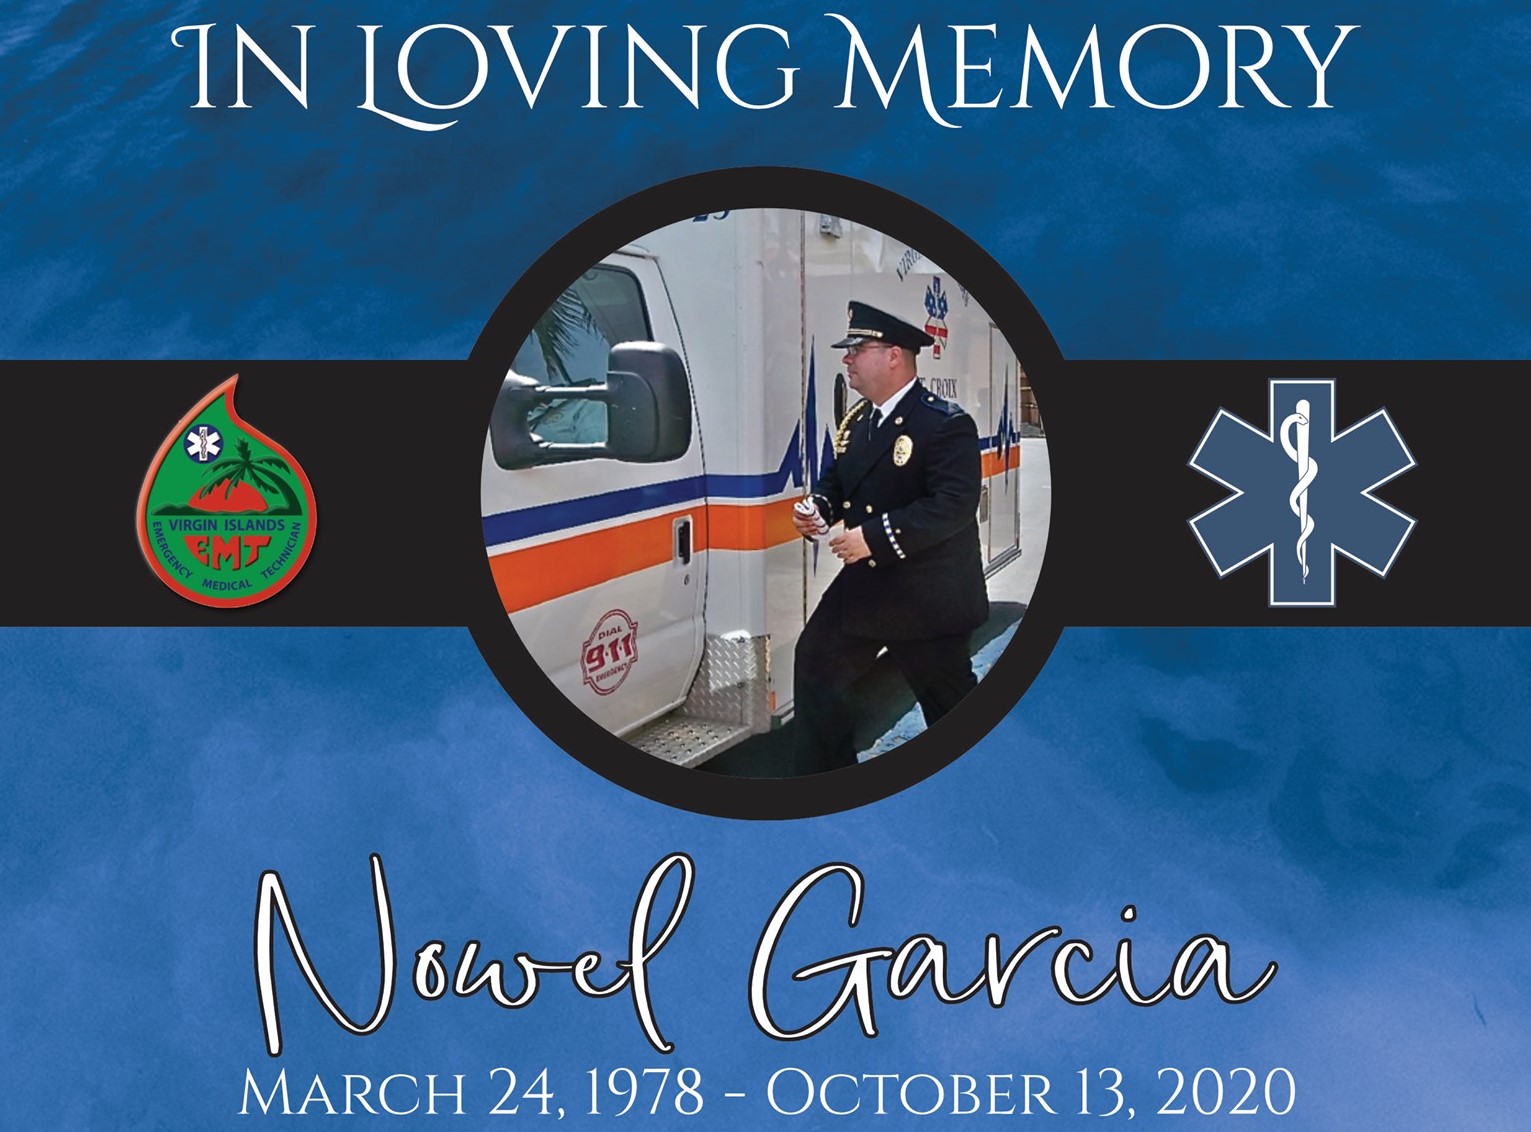 St. Croix Paramedic Loses 3-Year Battle With Colon Cancer, Dies At Age 42